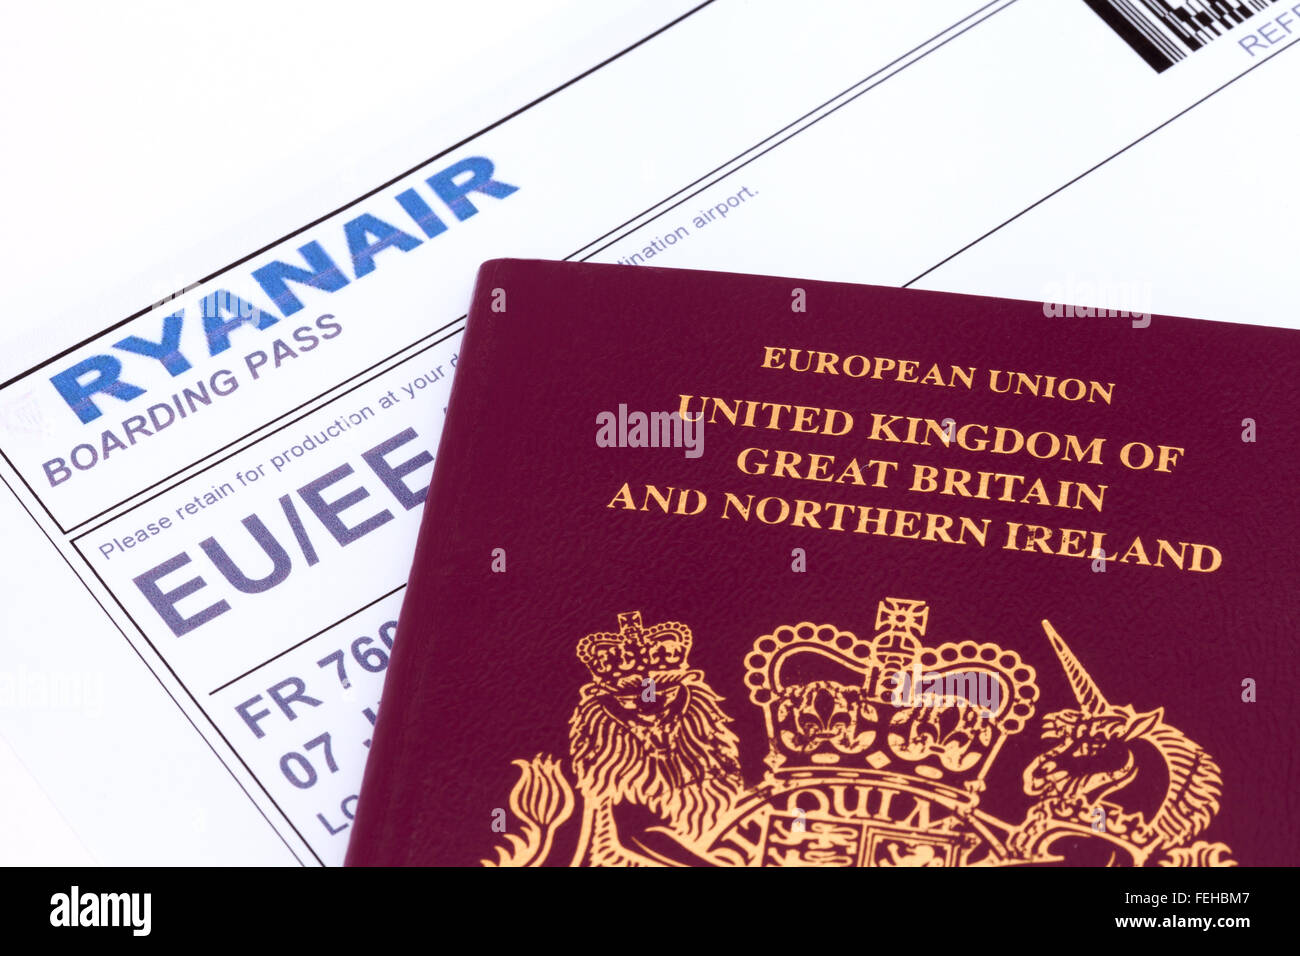 UK passport and Ryanair boarding pass - concept - travel, foreign travel, flying Stock Photo